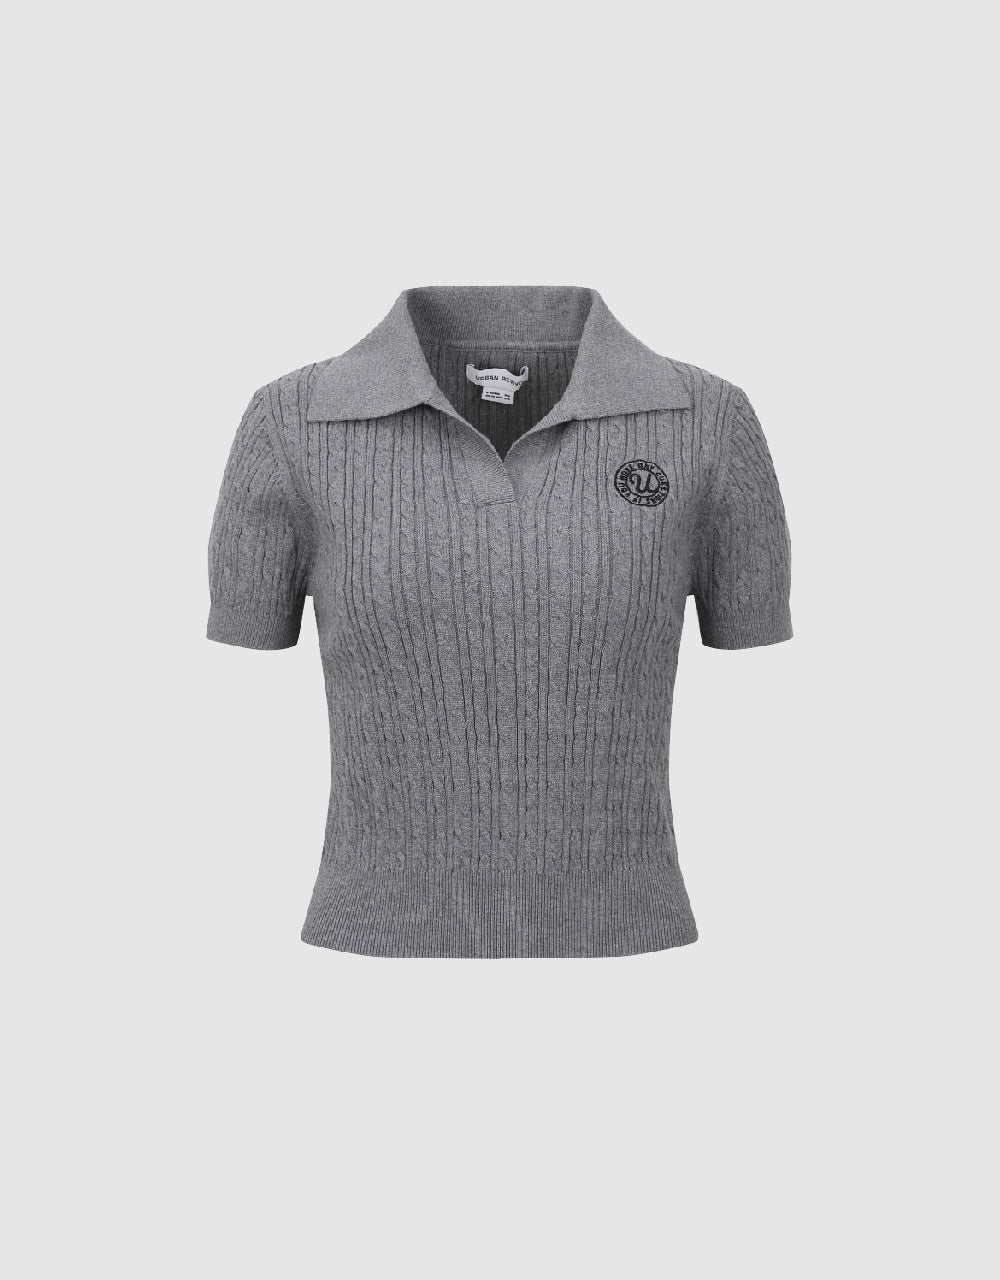 Standard Sleeve Polo Knitted T-Shirt